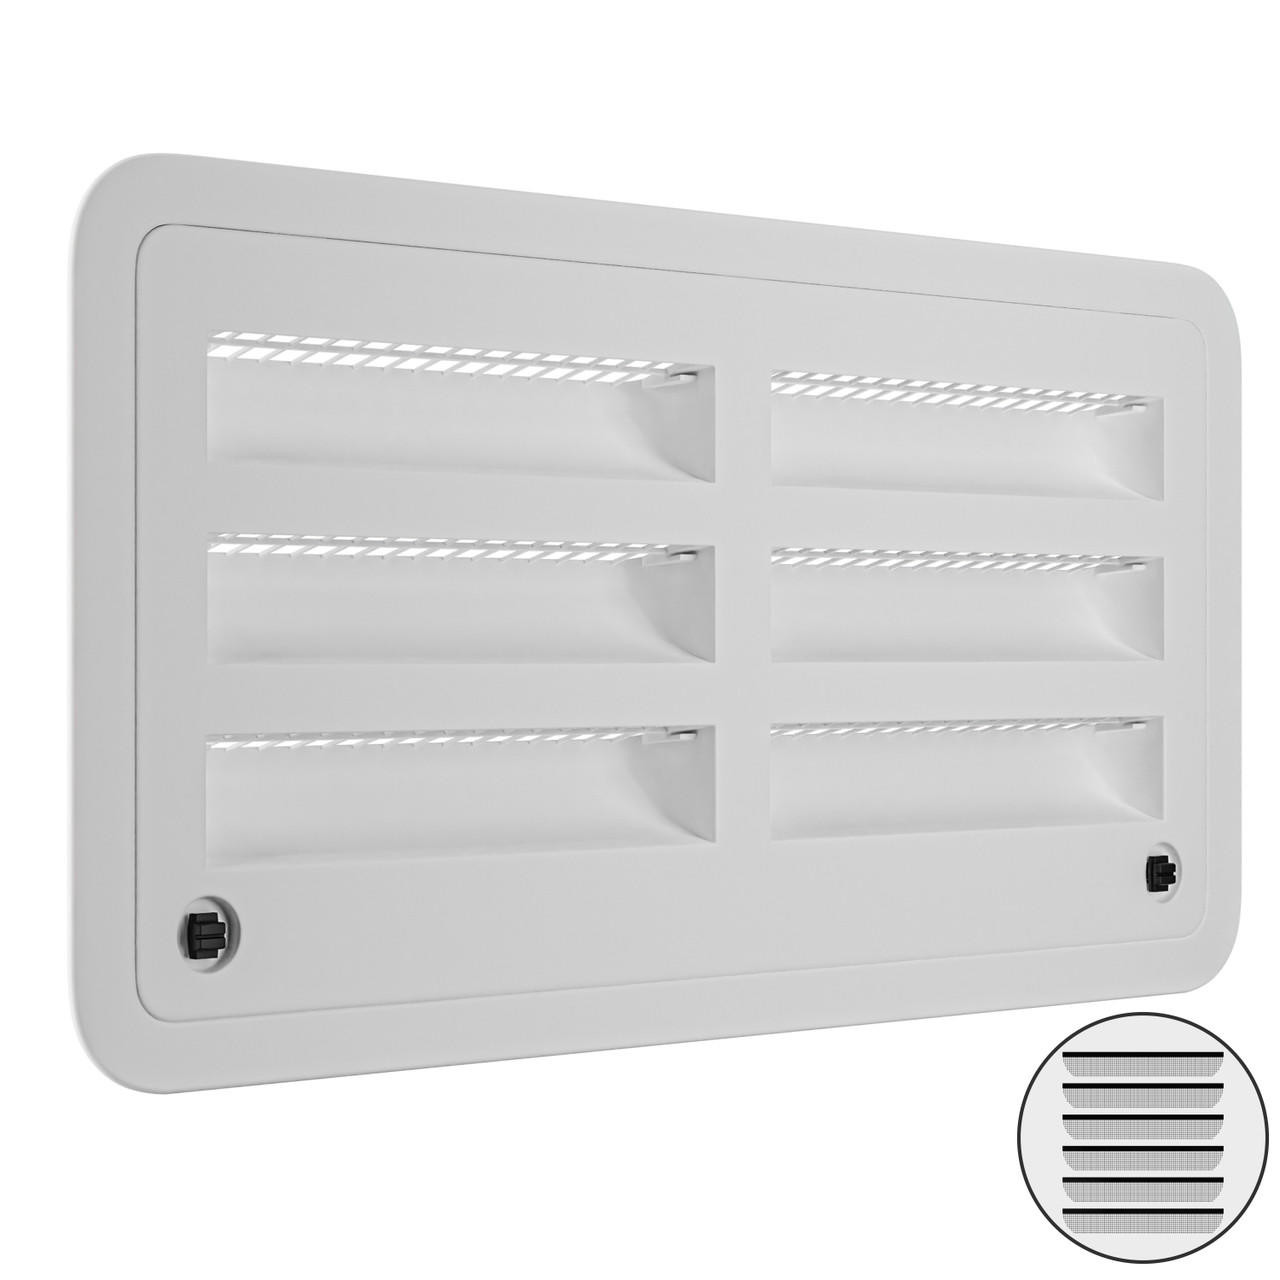 Leisure Coachworks 20 RV Refrigerator Upper/Lower Side Vent with Mesh Insect Screens for RVs Motorhomes Fifth Wheels Trailers